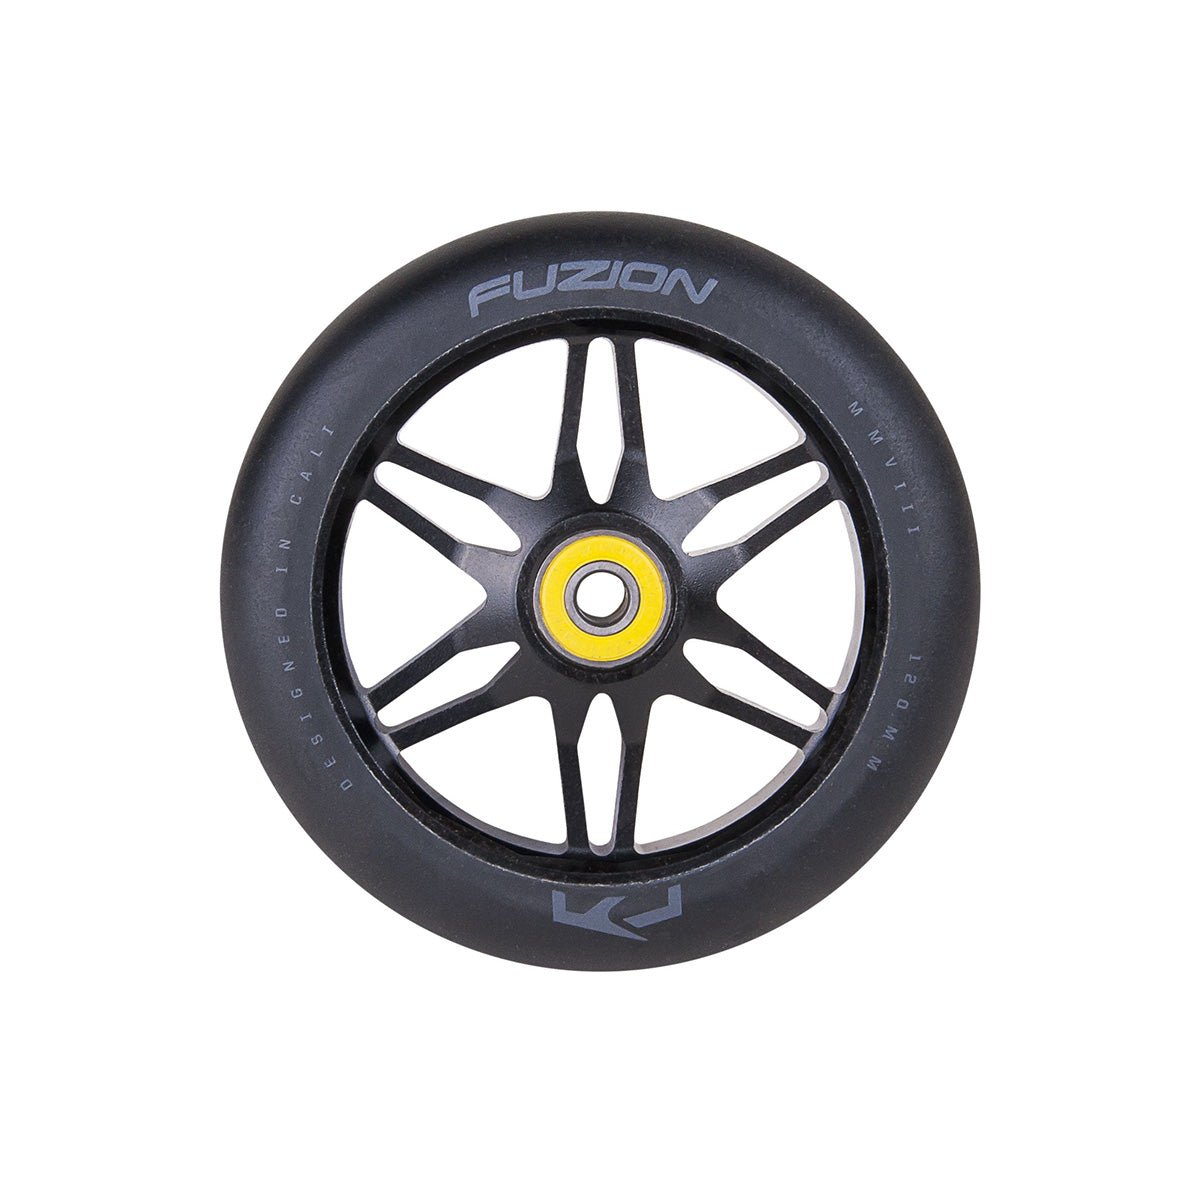 Fuzion Ace Wheels - Riding Scooters - Bland Pro Shop